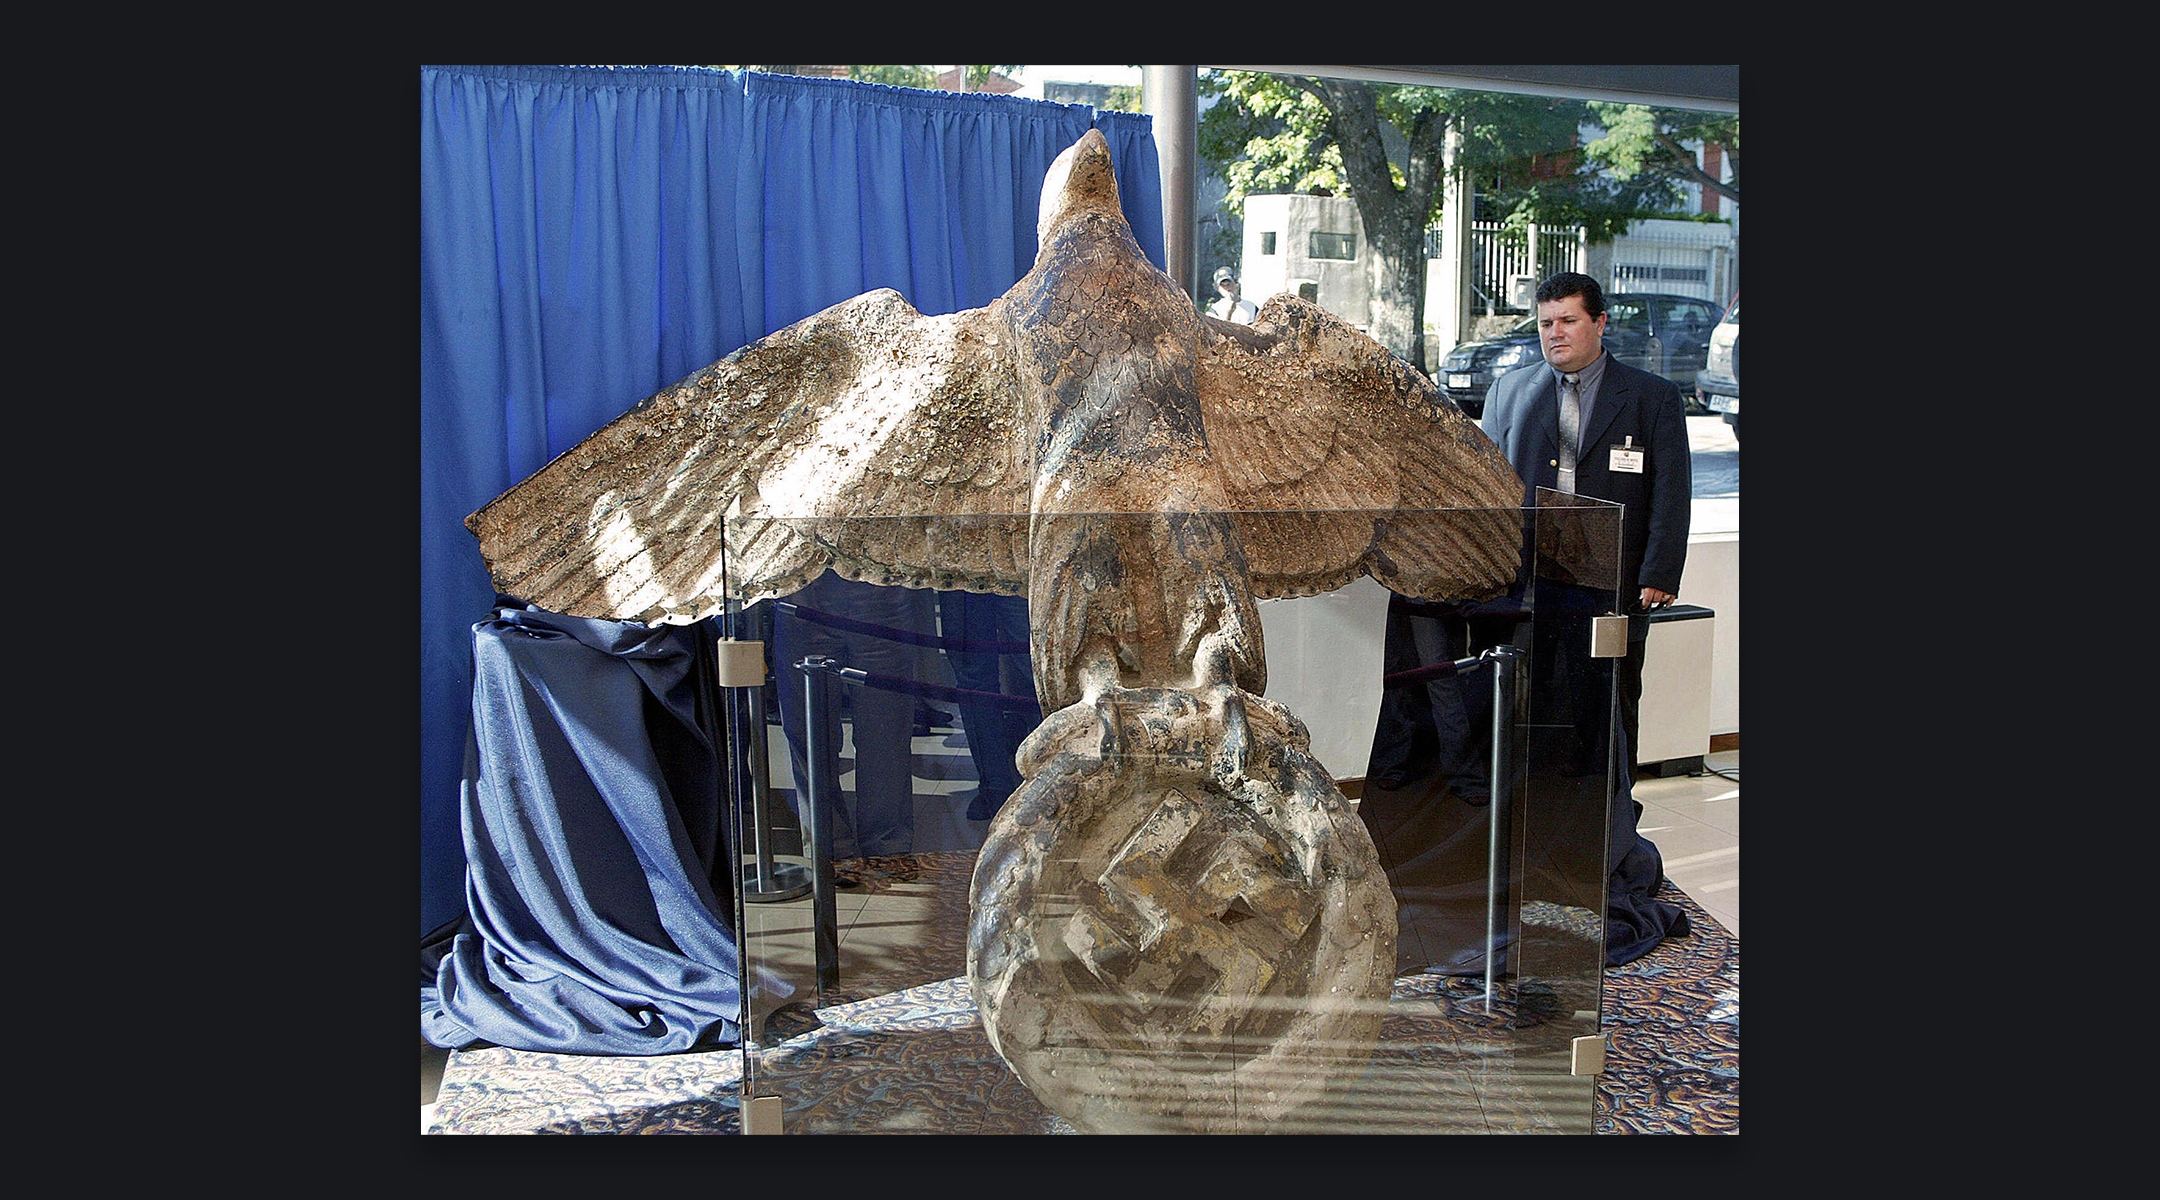 A security guard looks at the bronze eagle recovered from the stern of the German Graf Spee battleship, on display in Montevideo, Uruguay, Feb. 13, 2006. (Miguel Rojo/AFP via Getty Images)